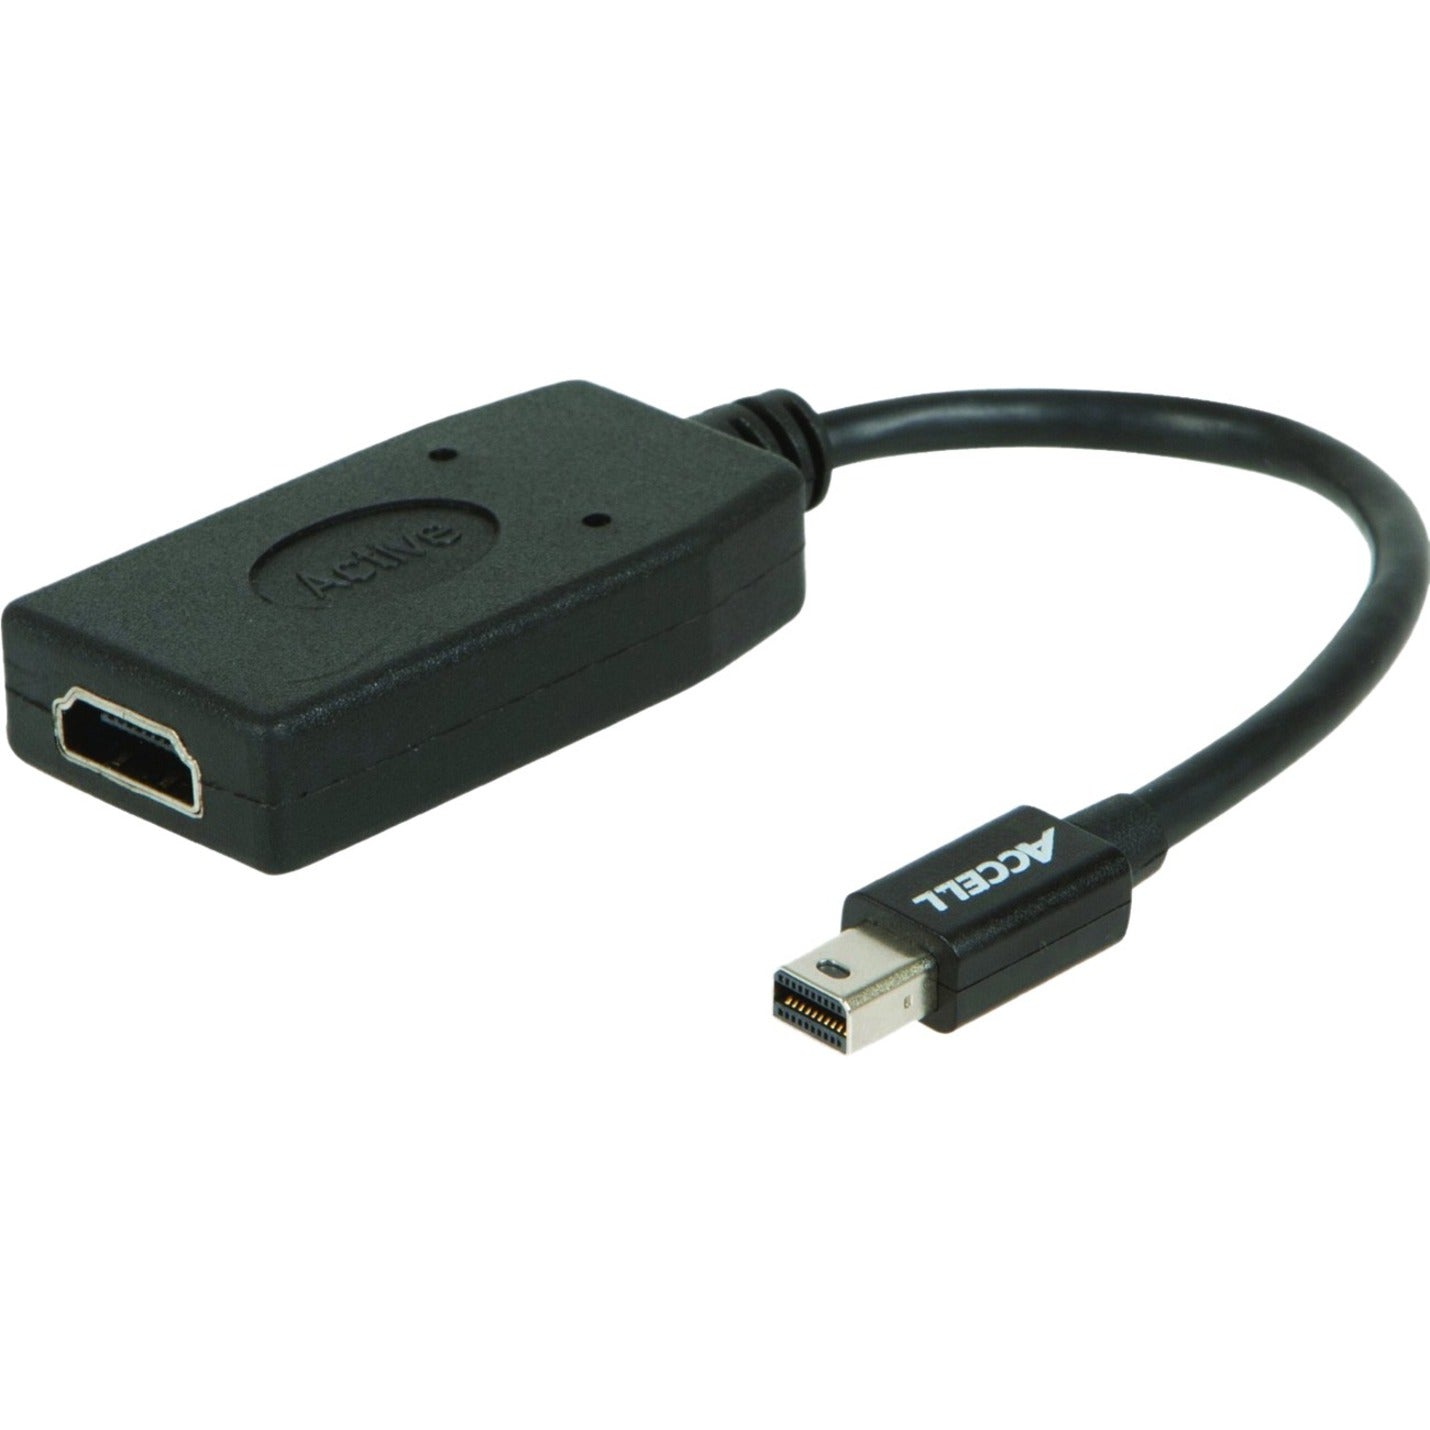 Accell UltraAV Mini DisplayPort/HDMI Audio/Video Cable [Discontinued]